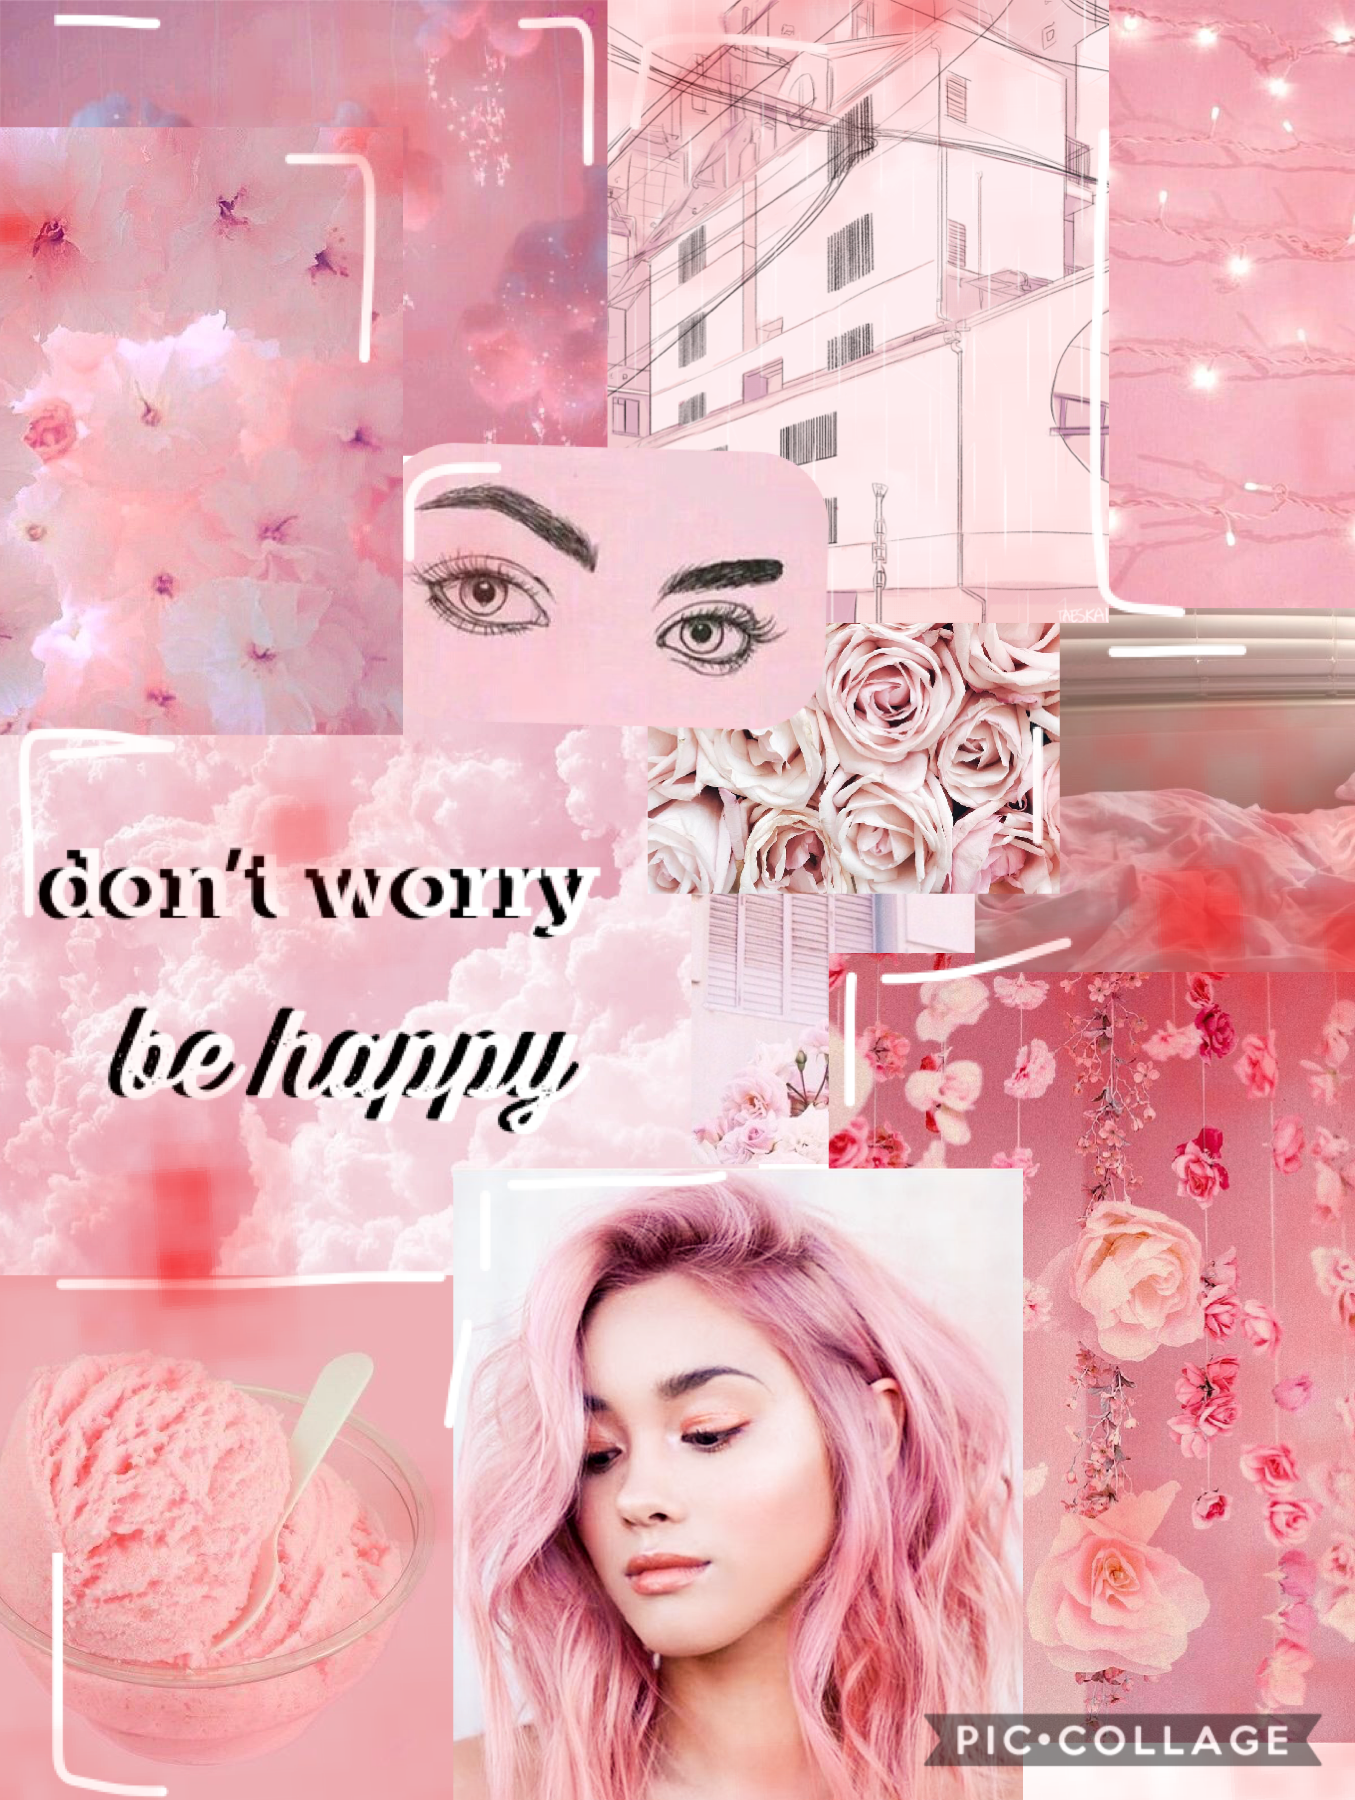 don’t worry - be happy 💗

hellooooo!! welcome to my collages! just wanted to say that any advice or tips for my collages would be GREATLY appreciated!! thank you guys!! 